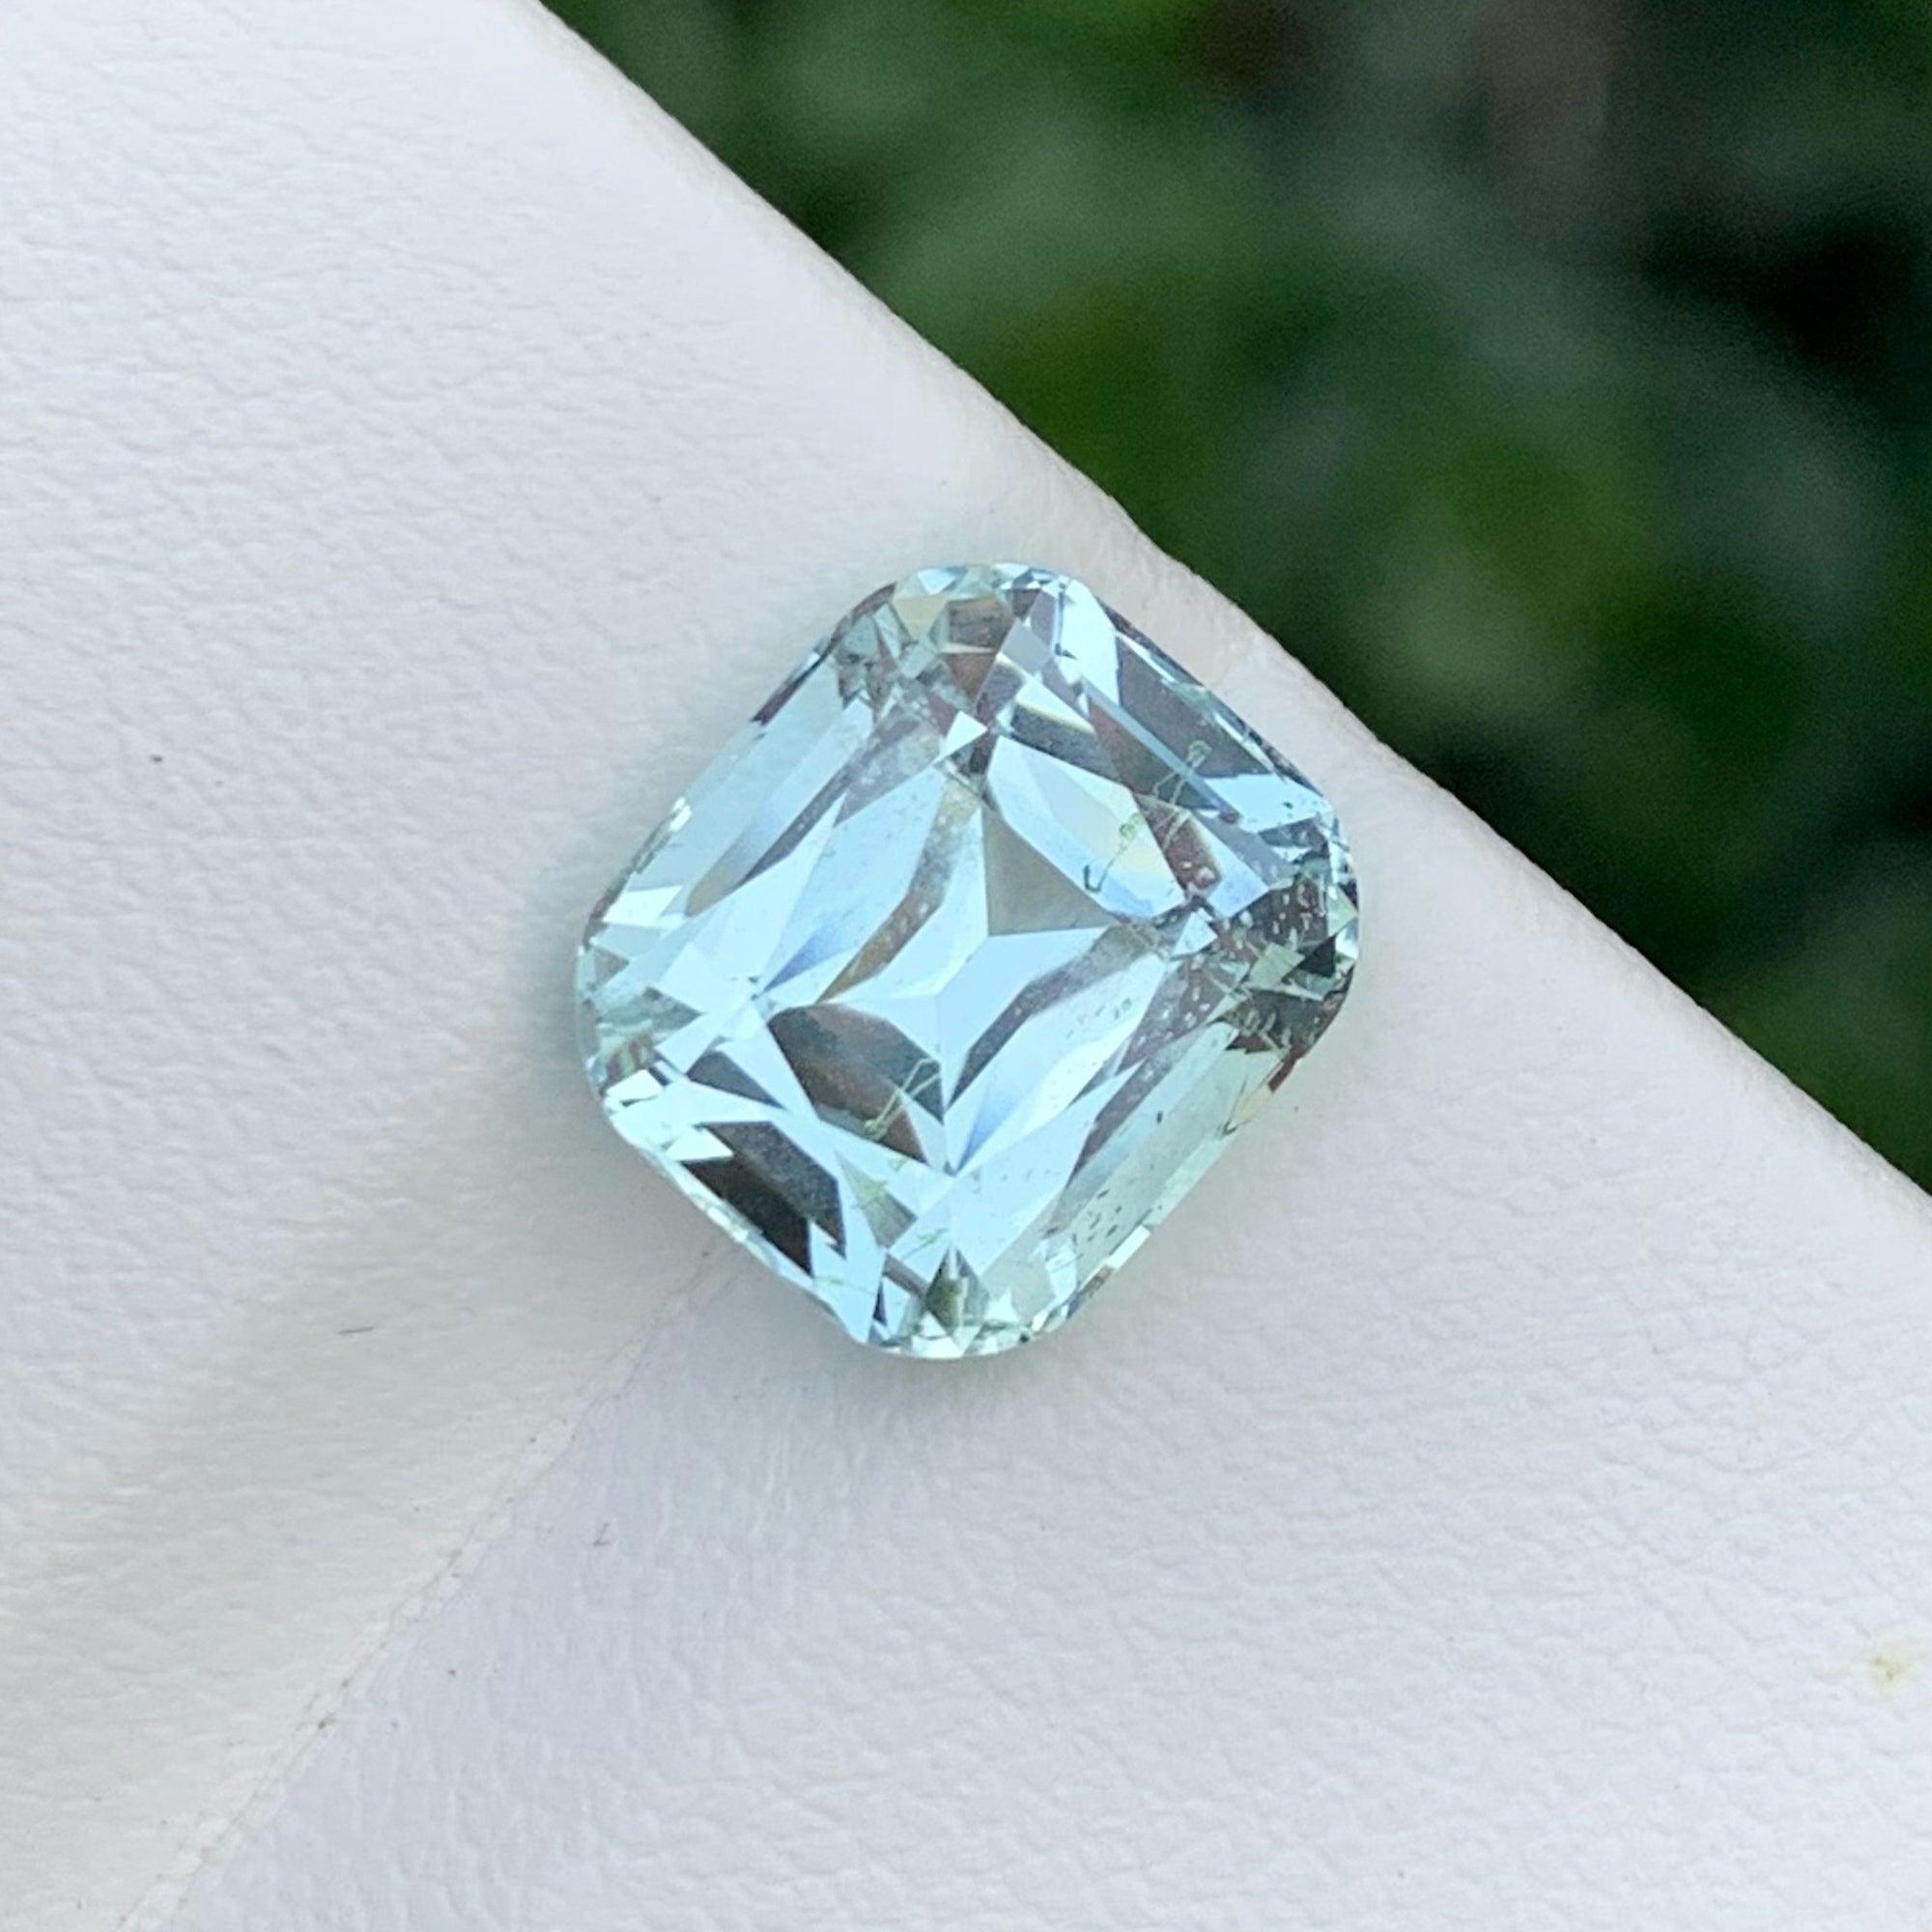 Lovely Natural Aquamarine Stone of 4.76 carats from Pakistan has a wonderful cut in a Cushion shape, incredible lightblue color, Great brilliance. This gem is SI Clarity.

Product Information:
GEMSTONE NAME: Lovely Natural Aquamarine